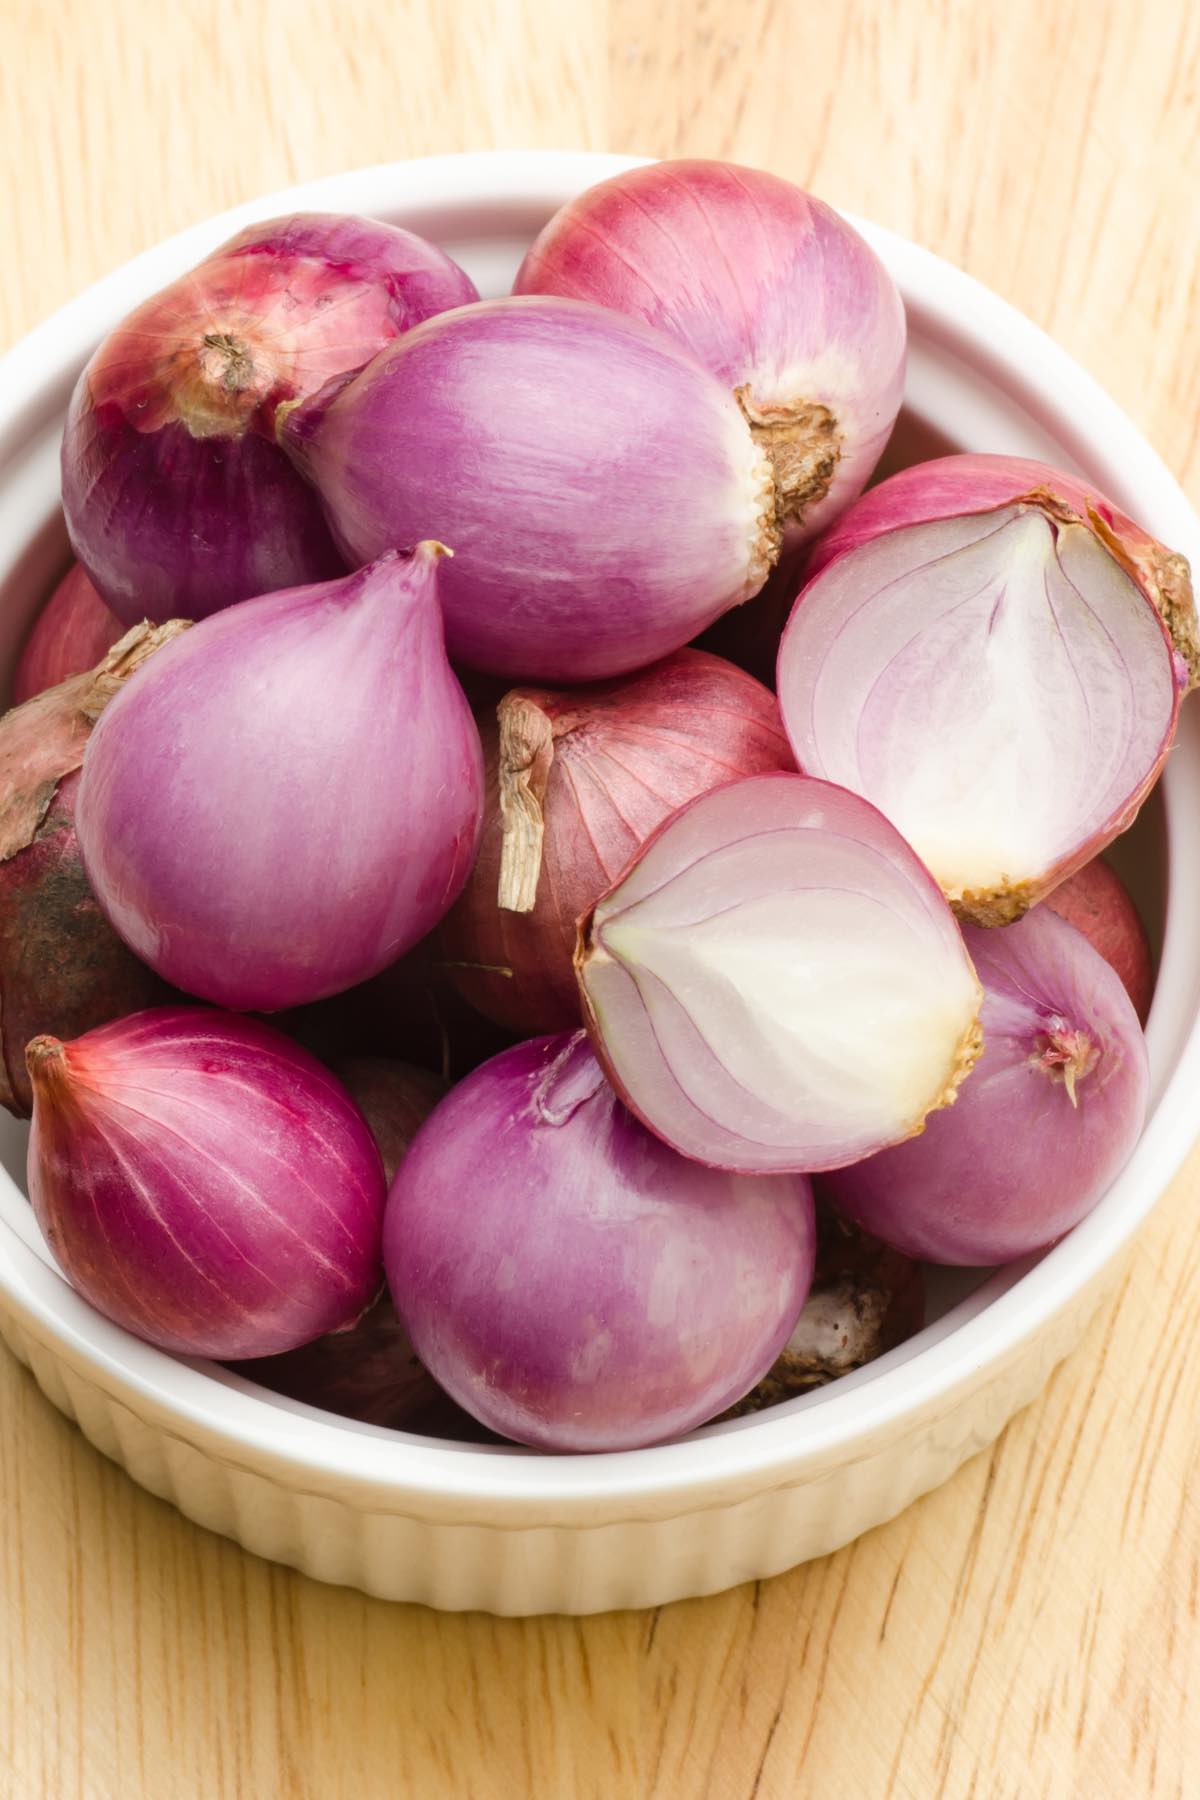 Need shallots for a recipe but forgot to buy them? Wondering whether you can substitute with regular onions or garlic? Today we’ll explore what are the best Shallot Substitutes you can use as a replacement.